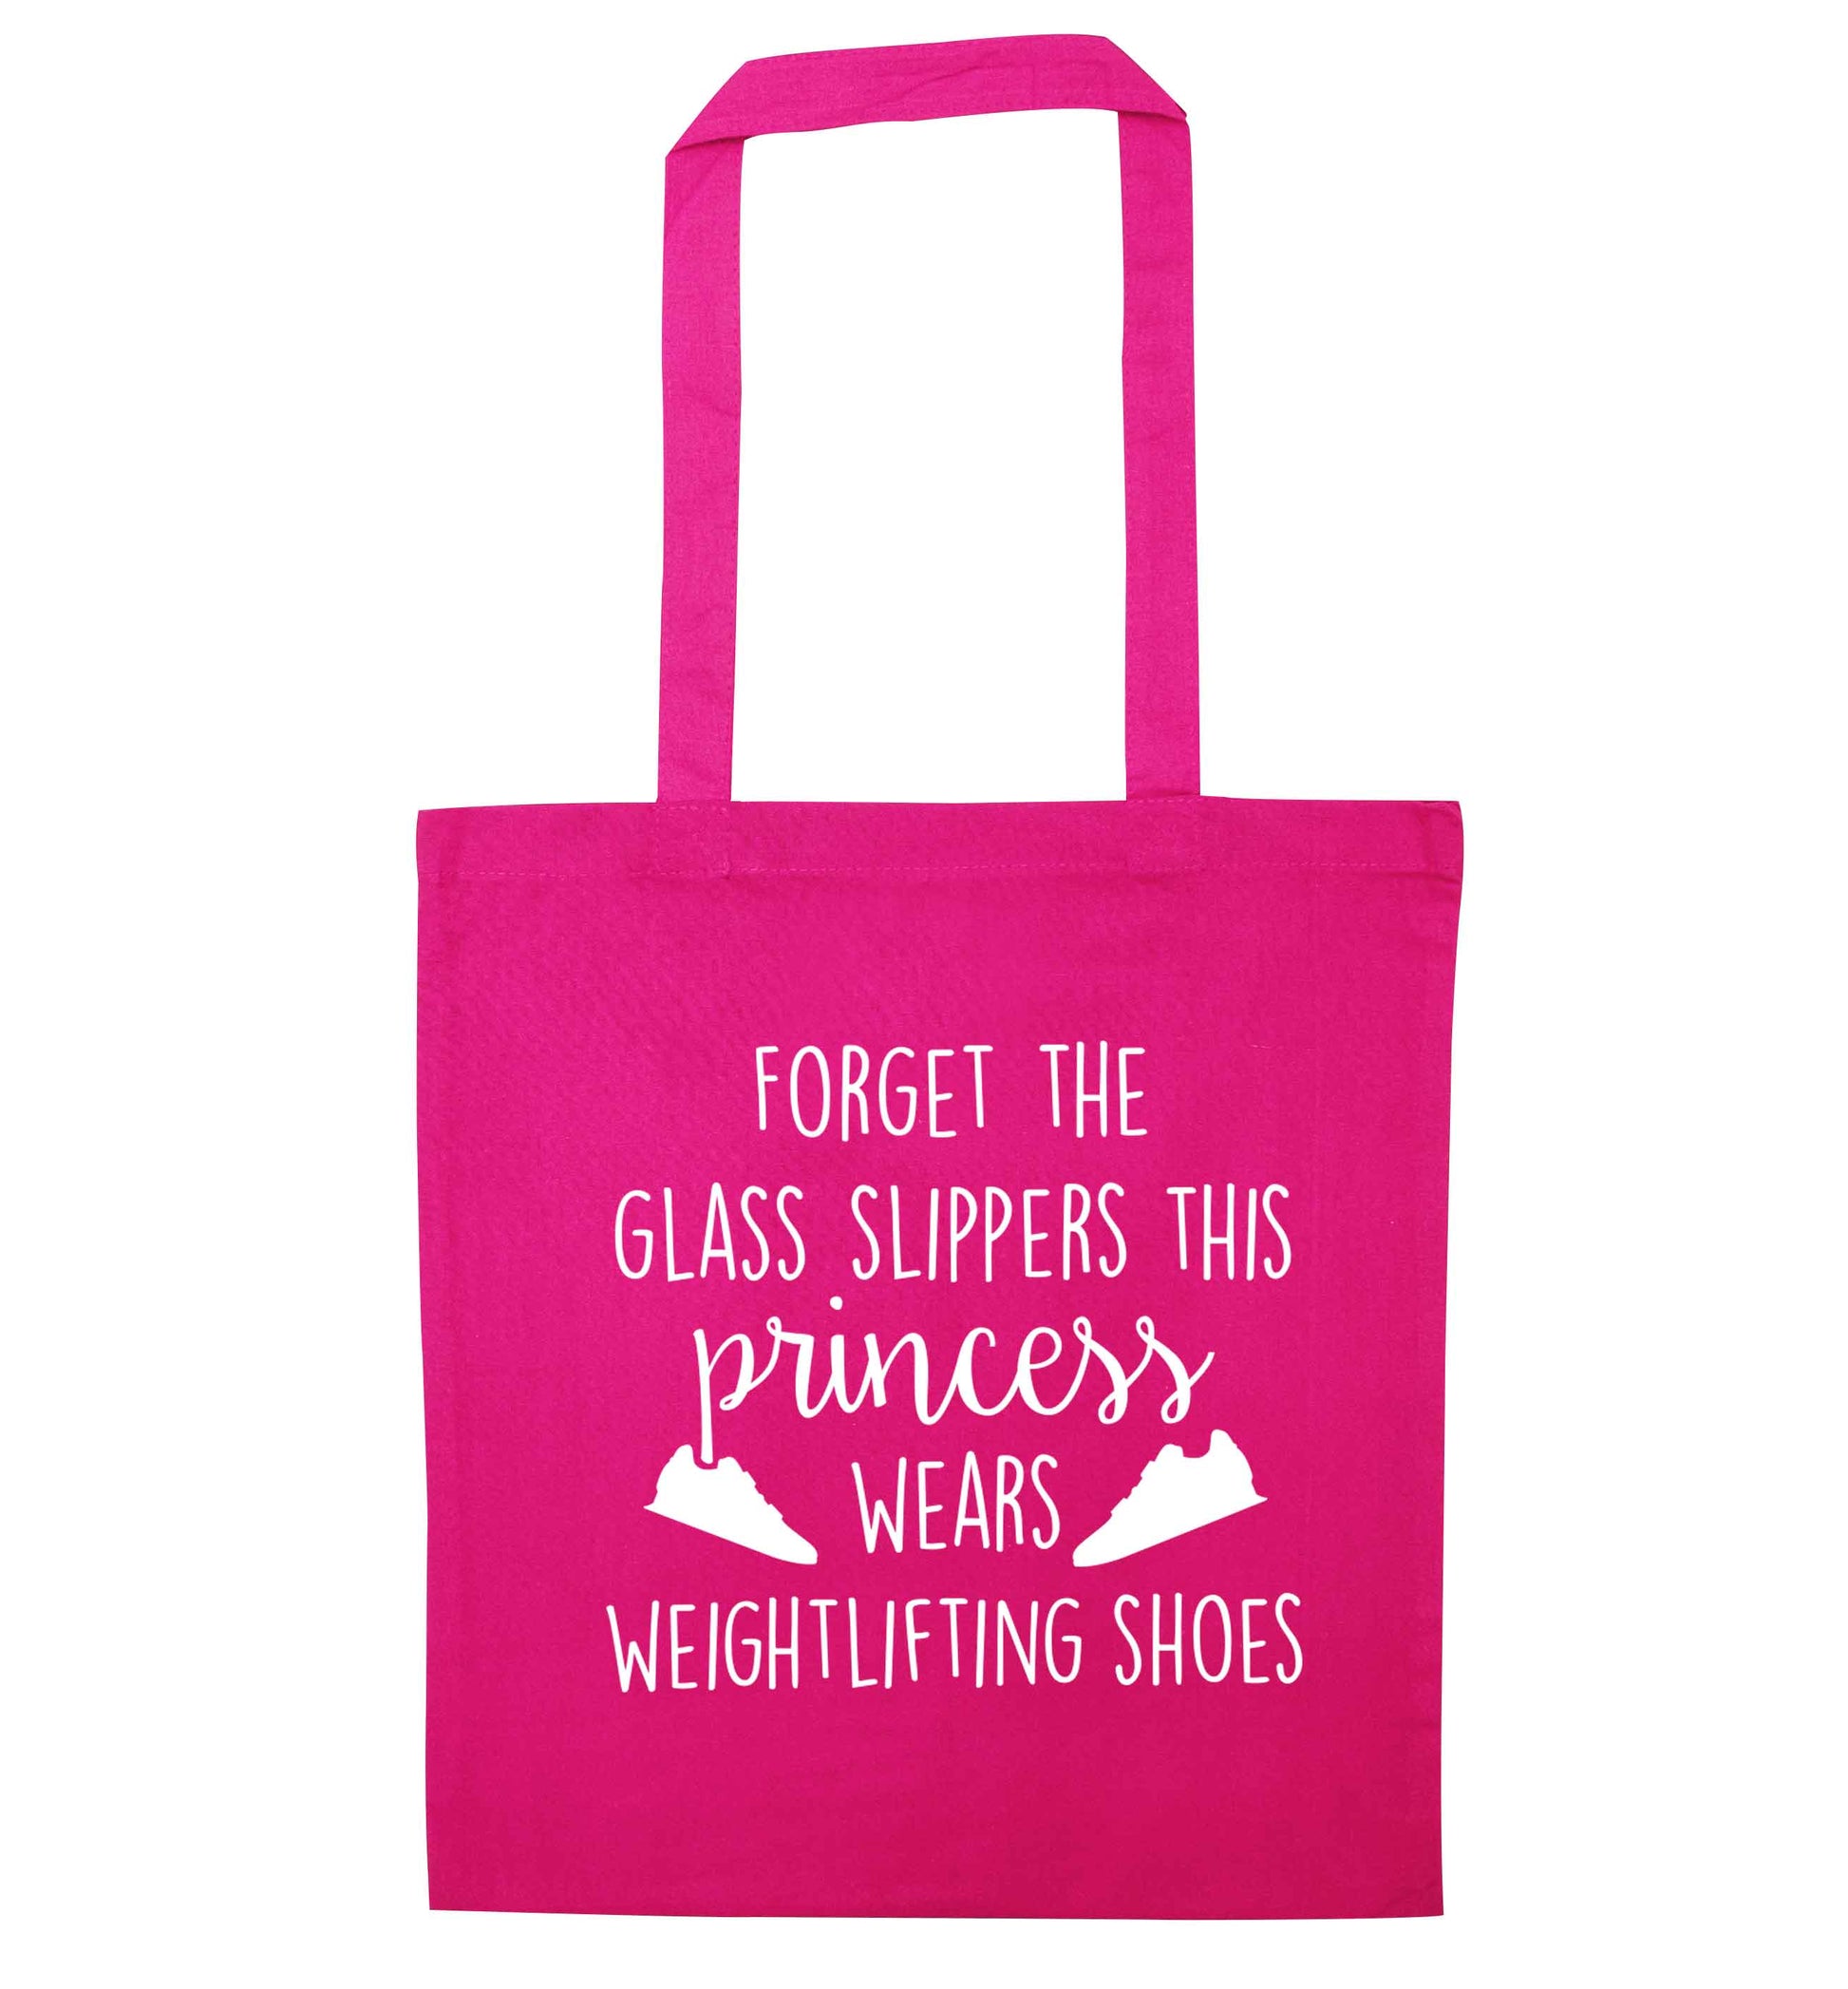 Forget the glass slippers this princess wears weightlifting shoes pink tote bag